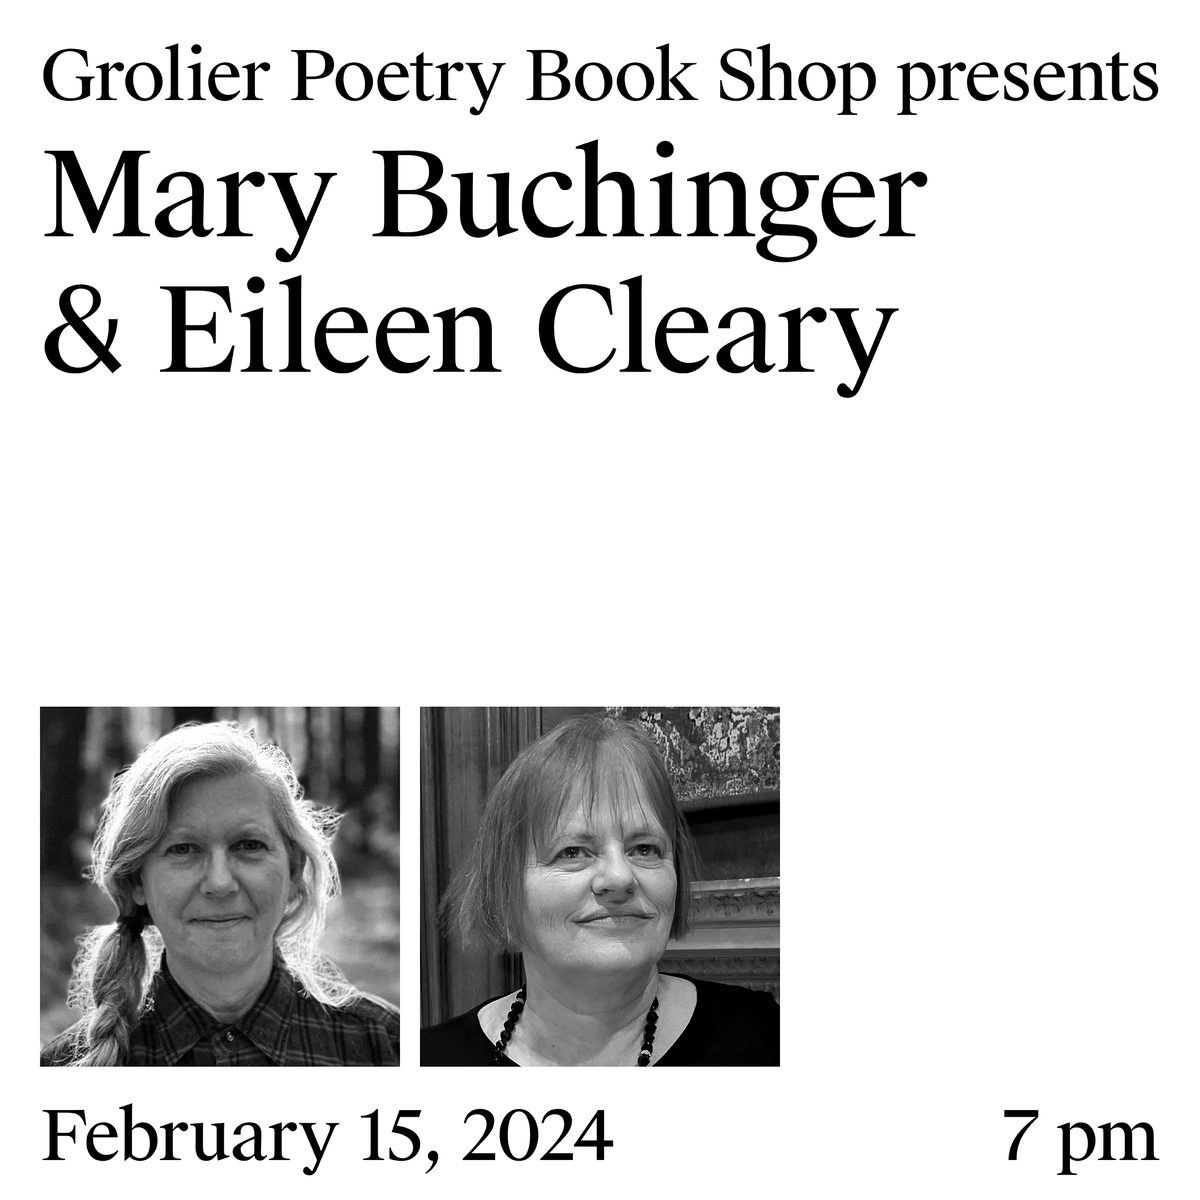 Mary Buchinger and Eileen Cleary are reading at the shop on Thursday February 15th, 2024 at 7 pm. Richard Hoffman is giving the introductions. Please join us in person or virtually. Sign up via our website.